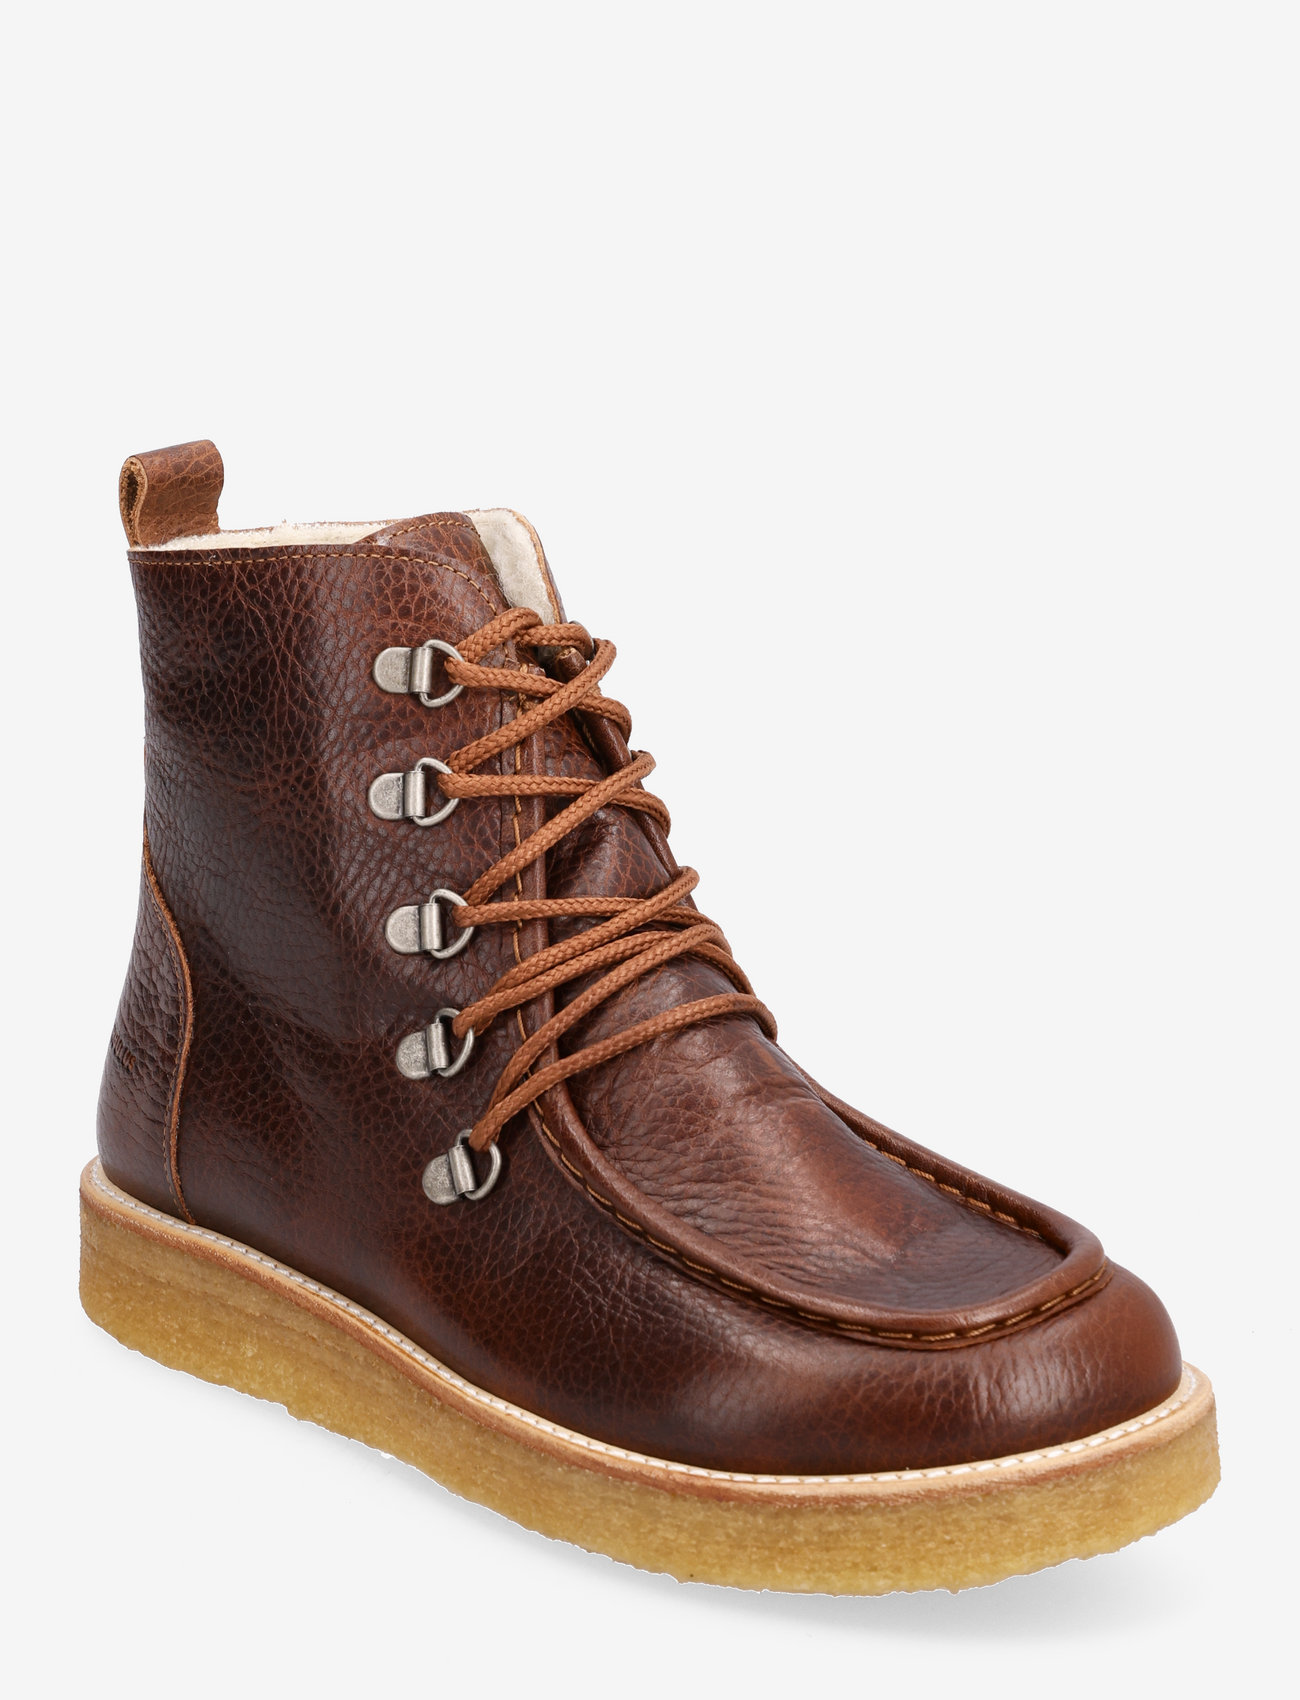 ANGULUS - Boots - flat - with laces - naisten - 2509 cognac - 0